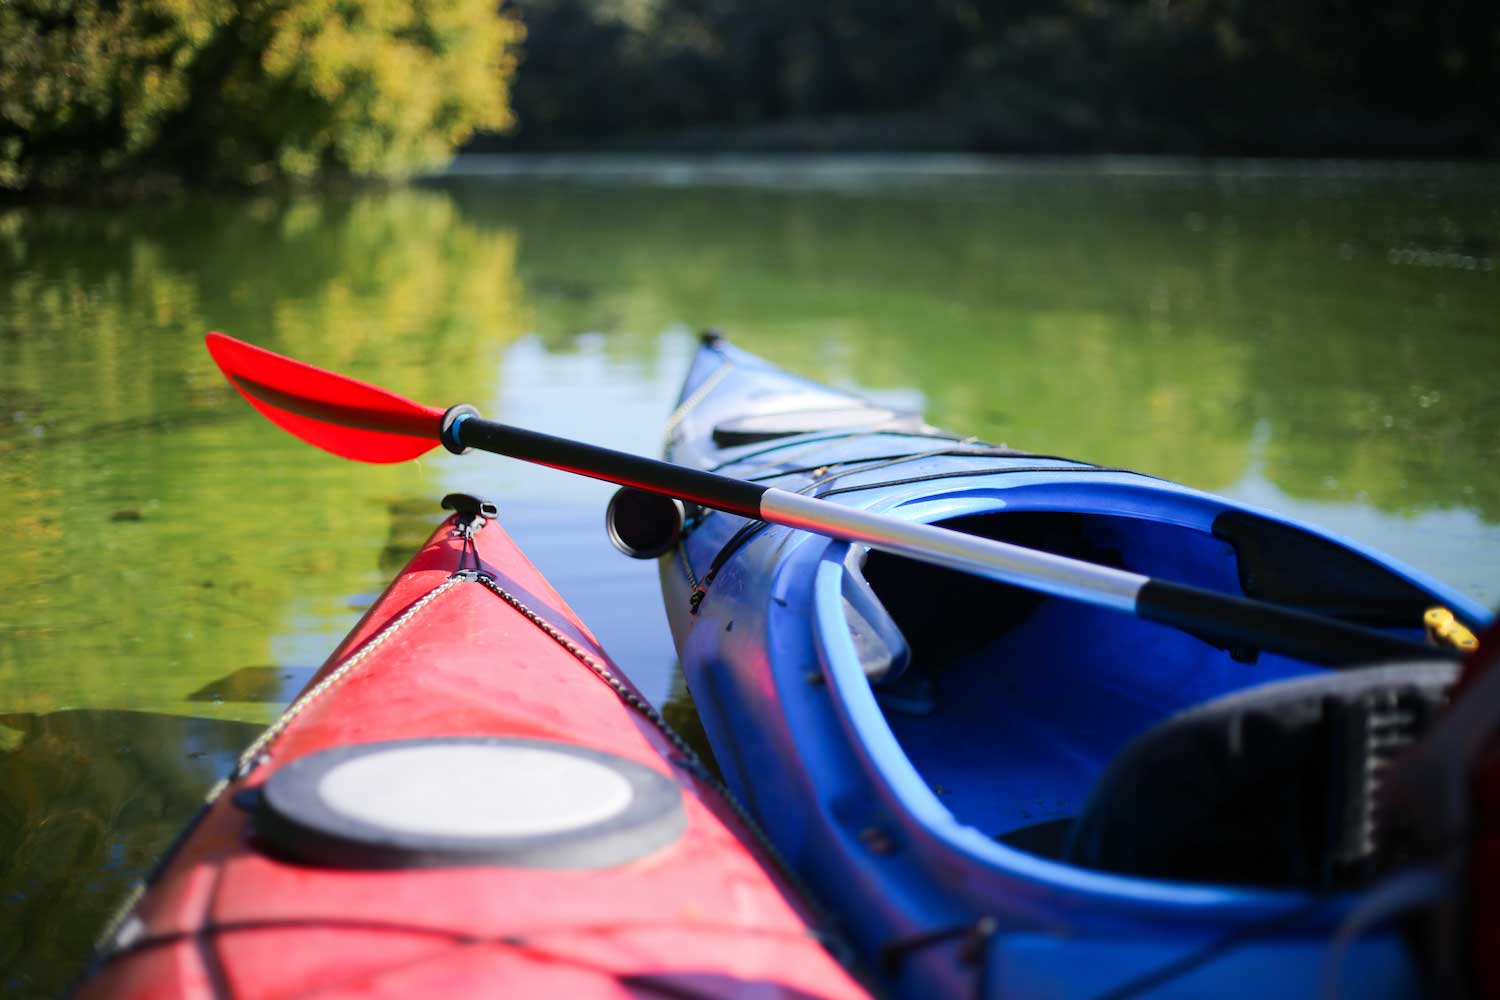 The tips of a red kayak and a blue kayak on the water.